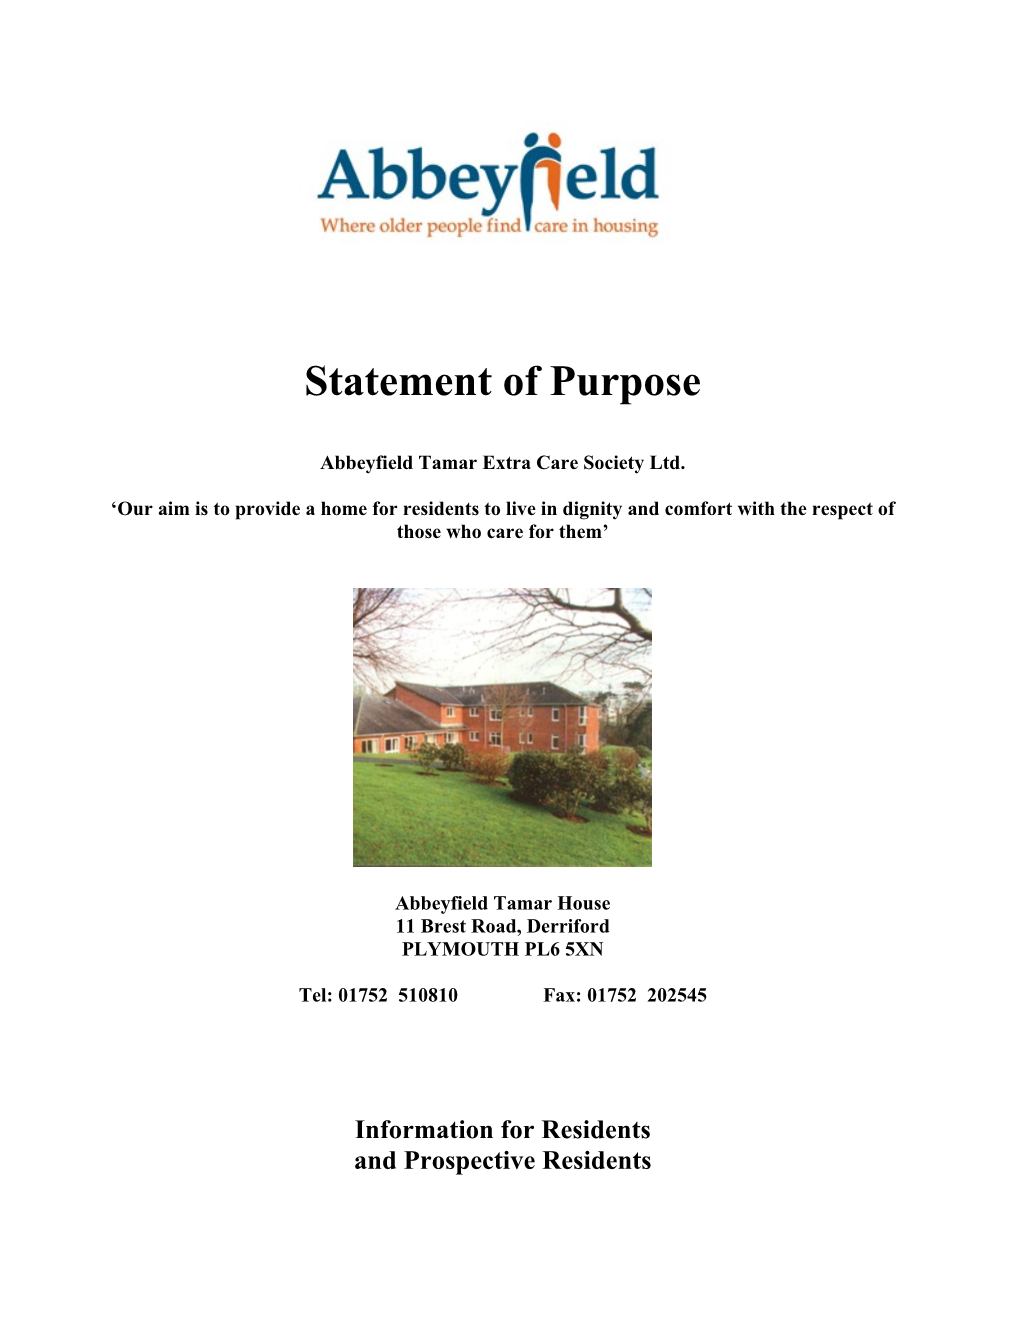 This Statement of Purpose Has Been Drawn up for AUK Residents and Propsective Residents